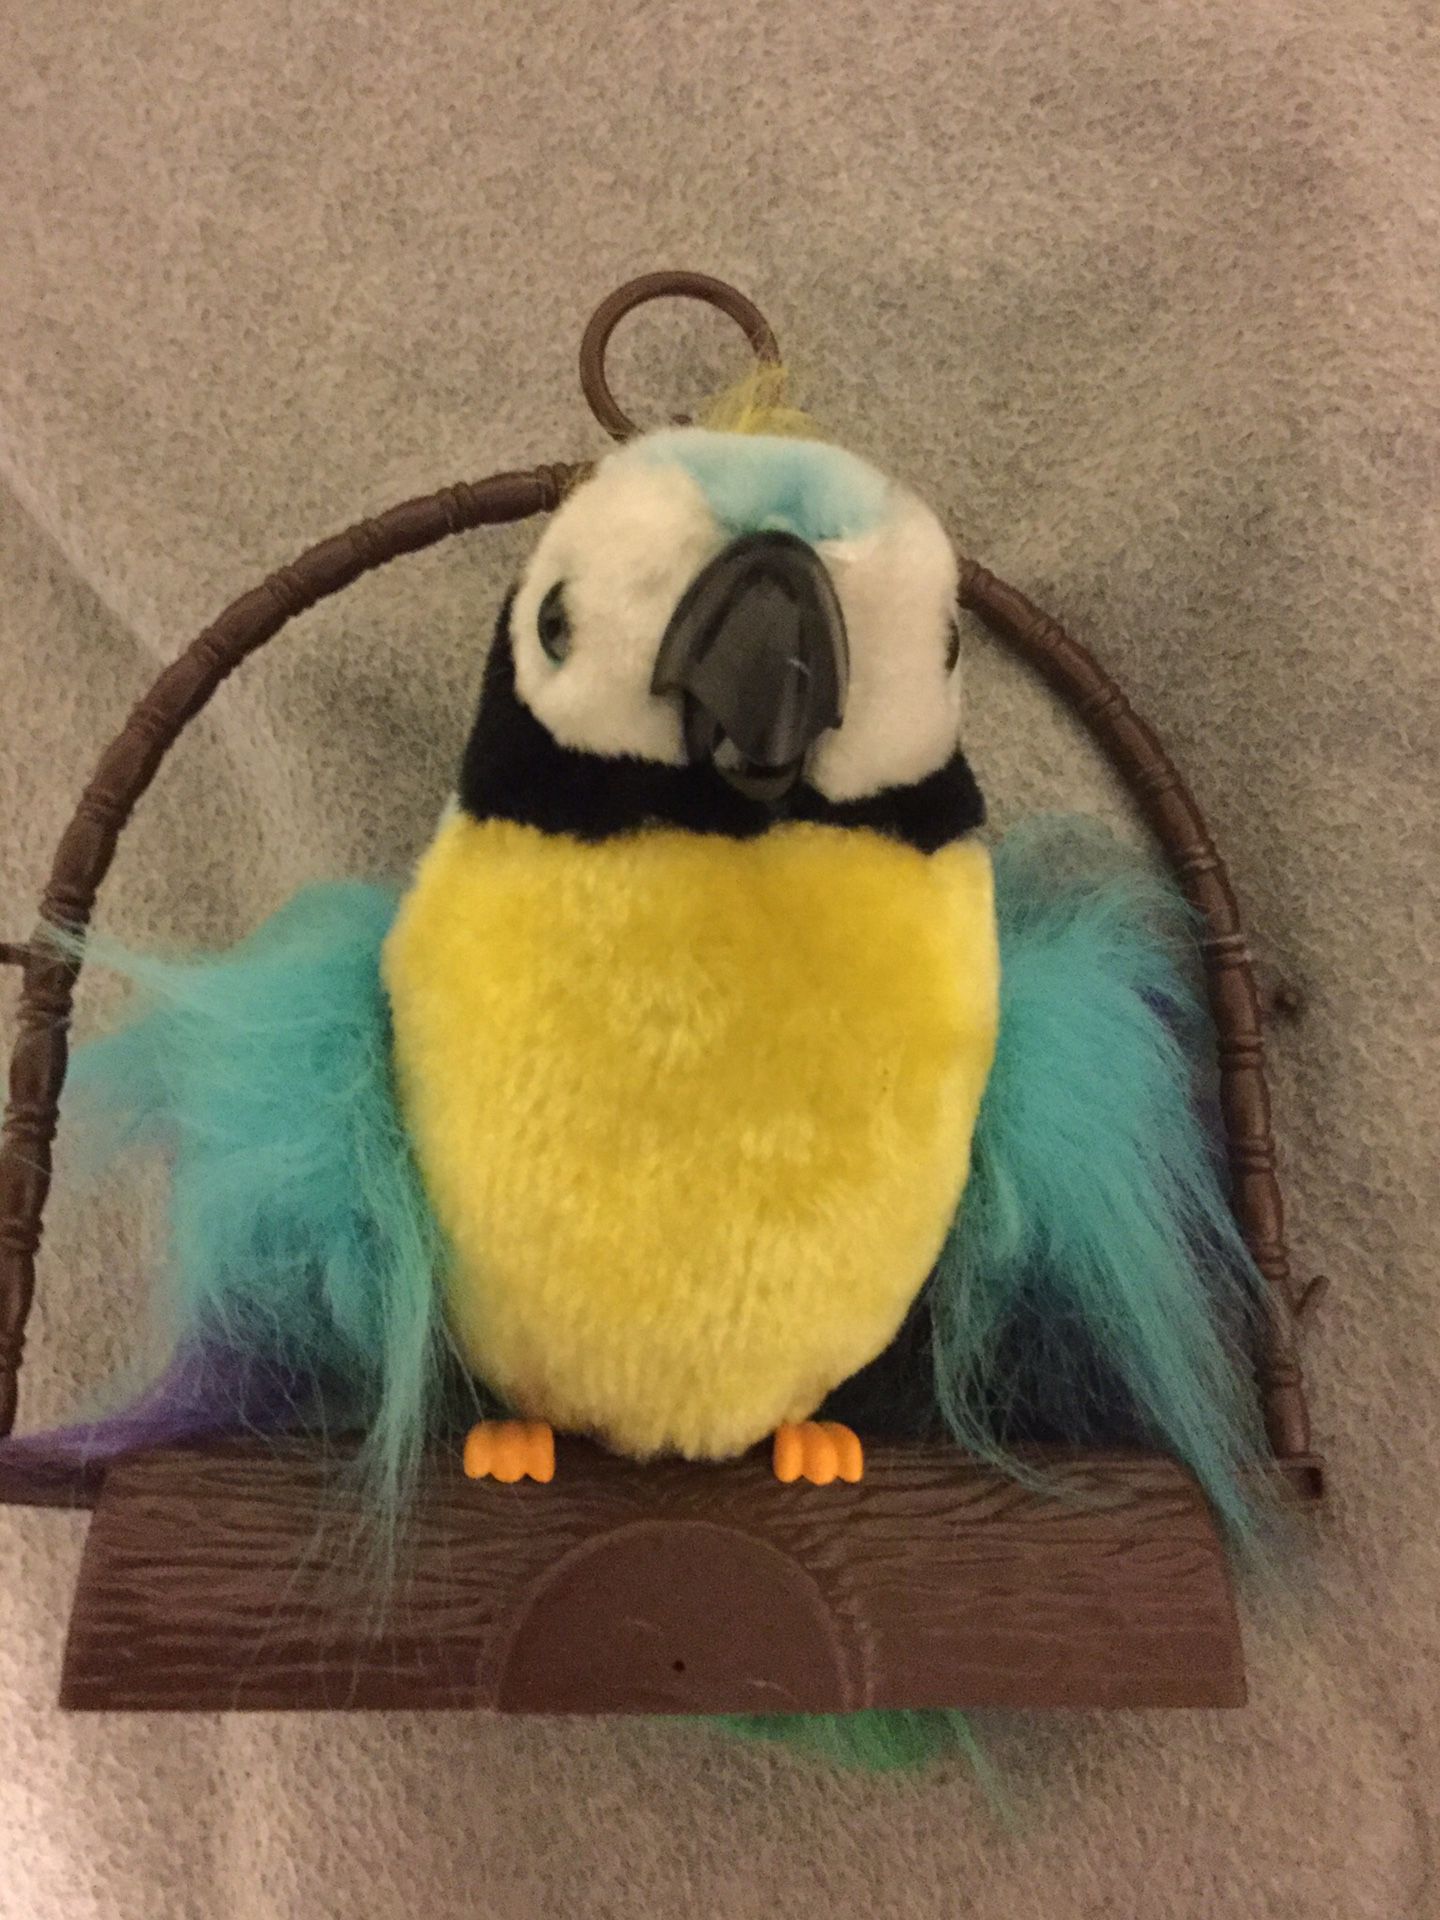 Rude cursing talking parrot house decor (Spencer’s gifts) For Sale